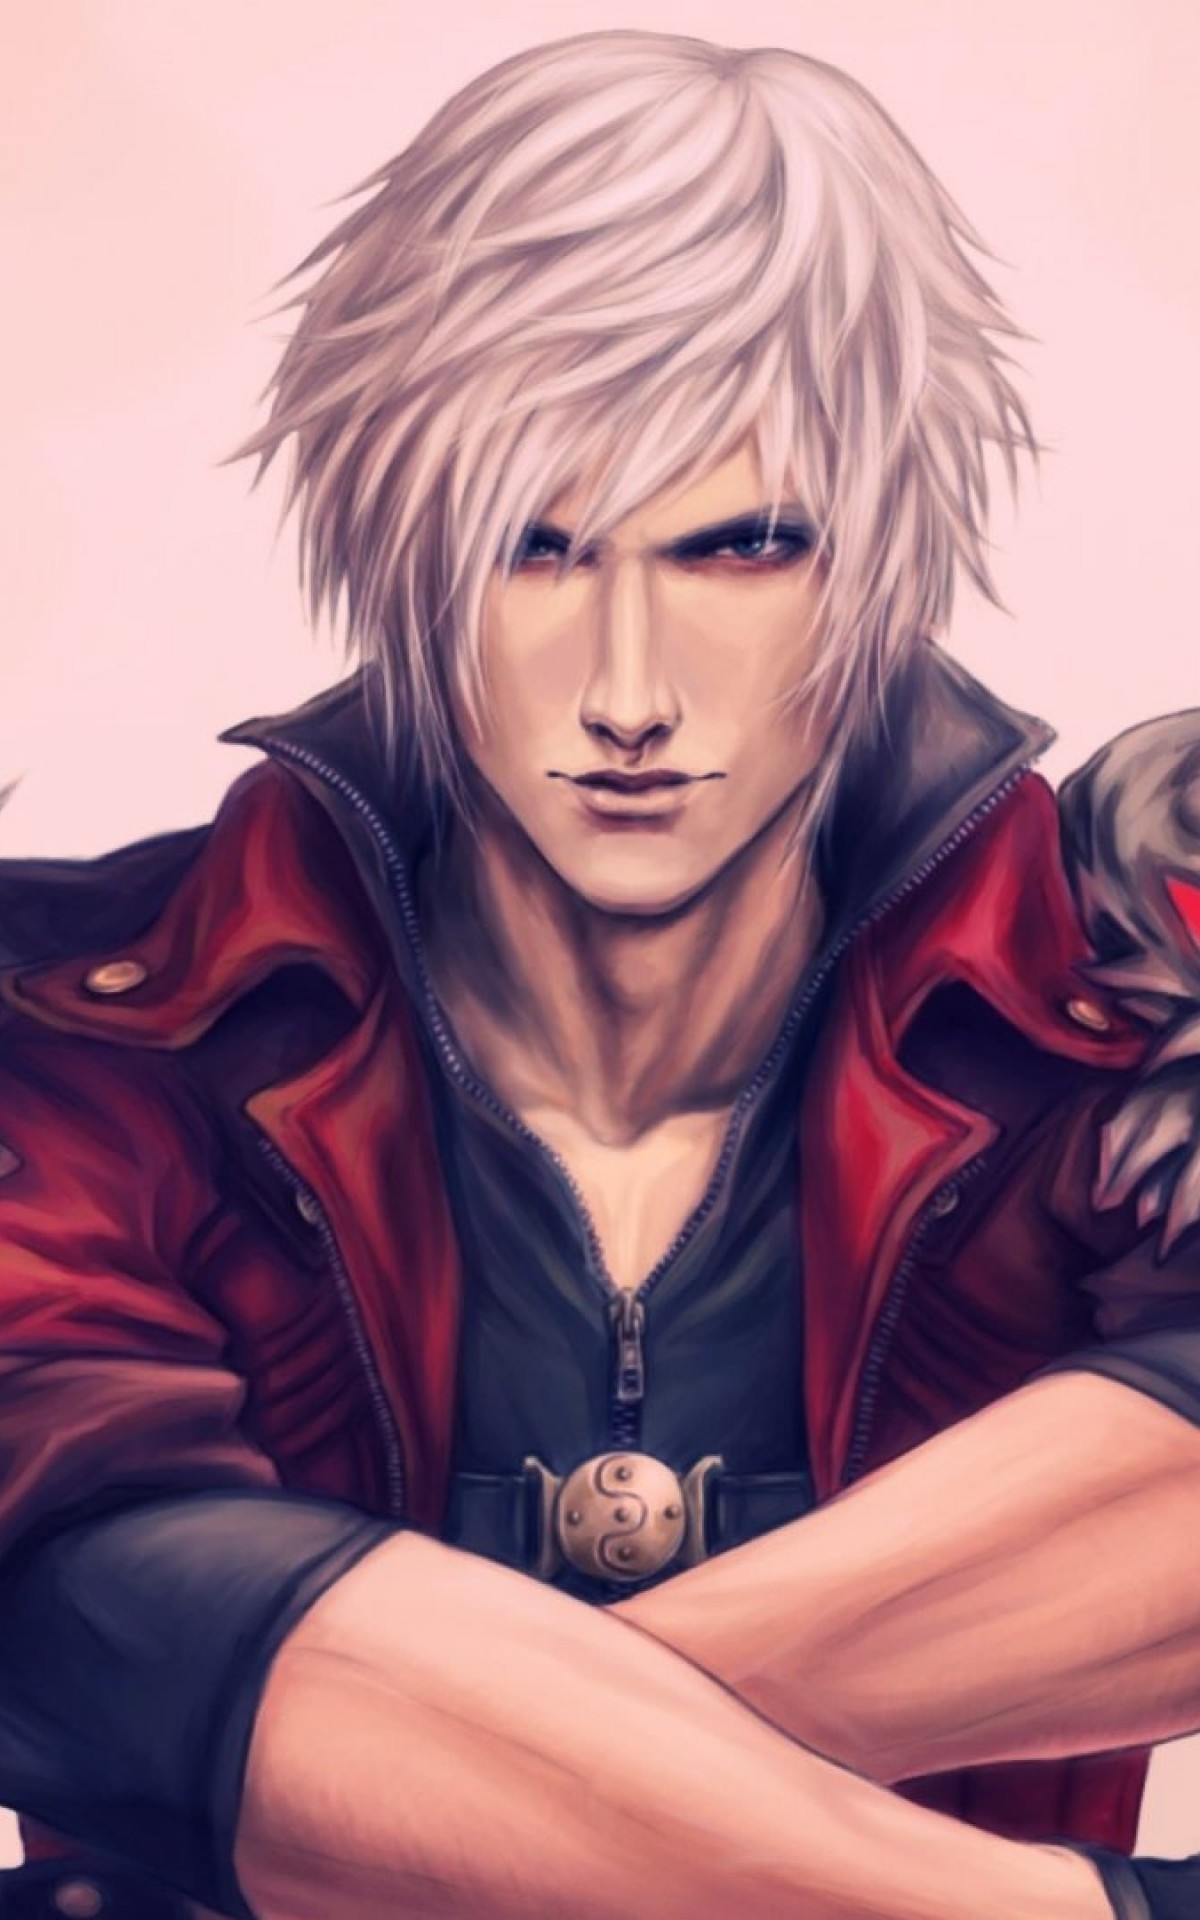 Dante - Devil May Cry Wallpaper for Amazon Kindle Fire HDX